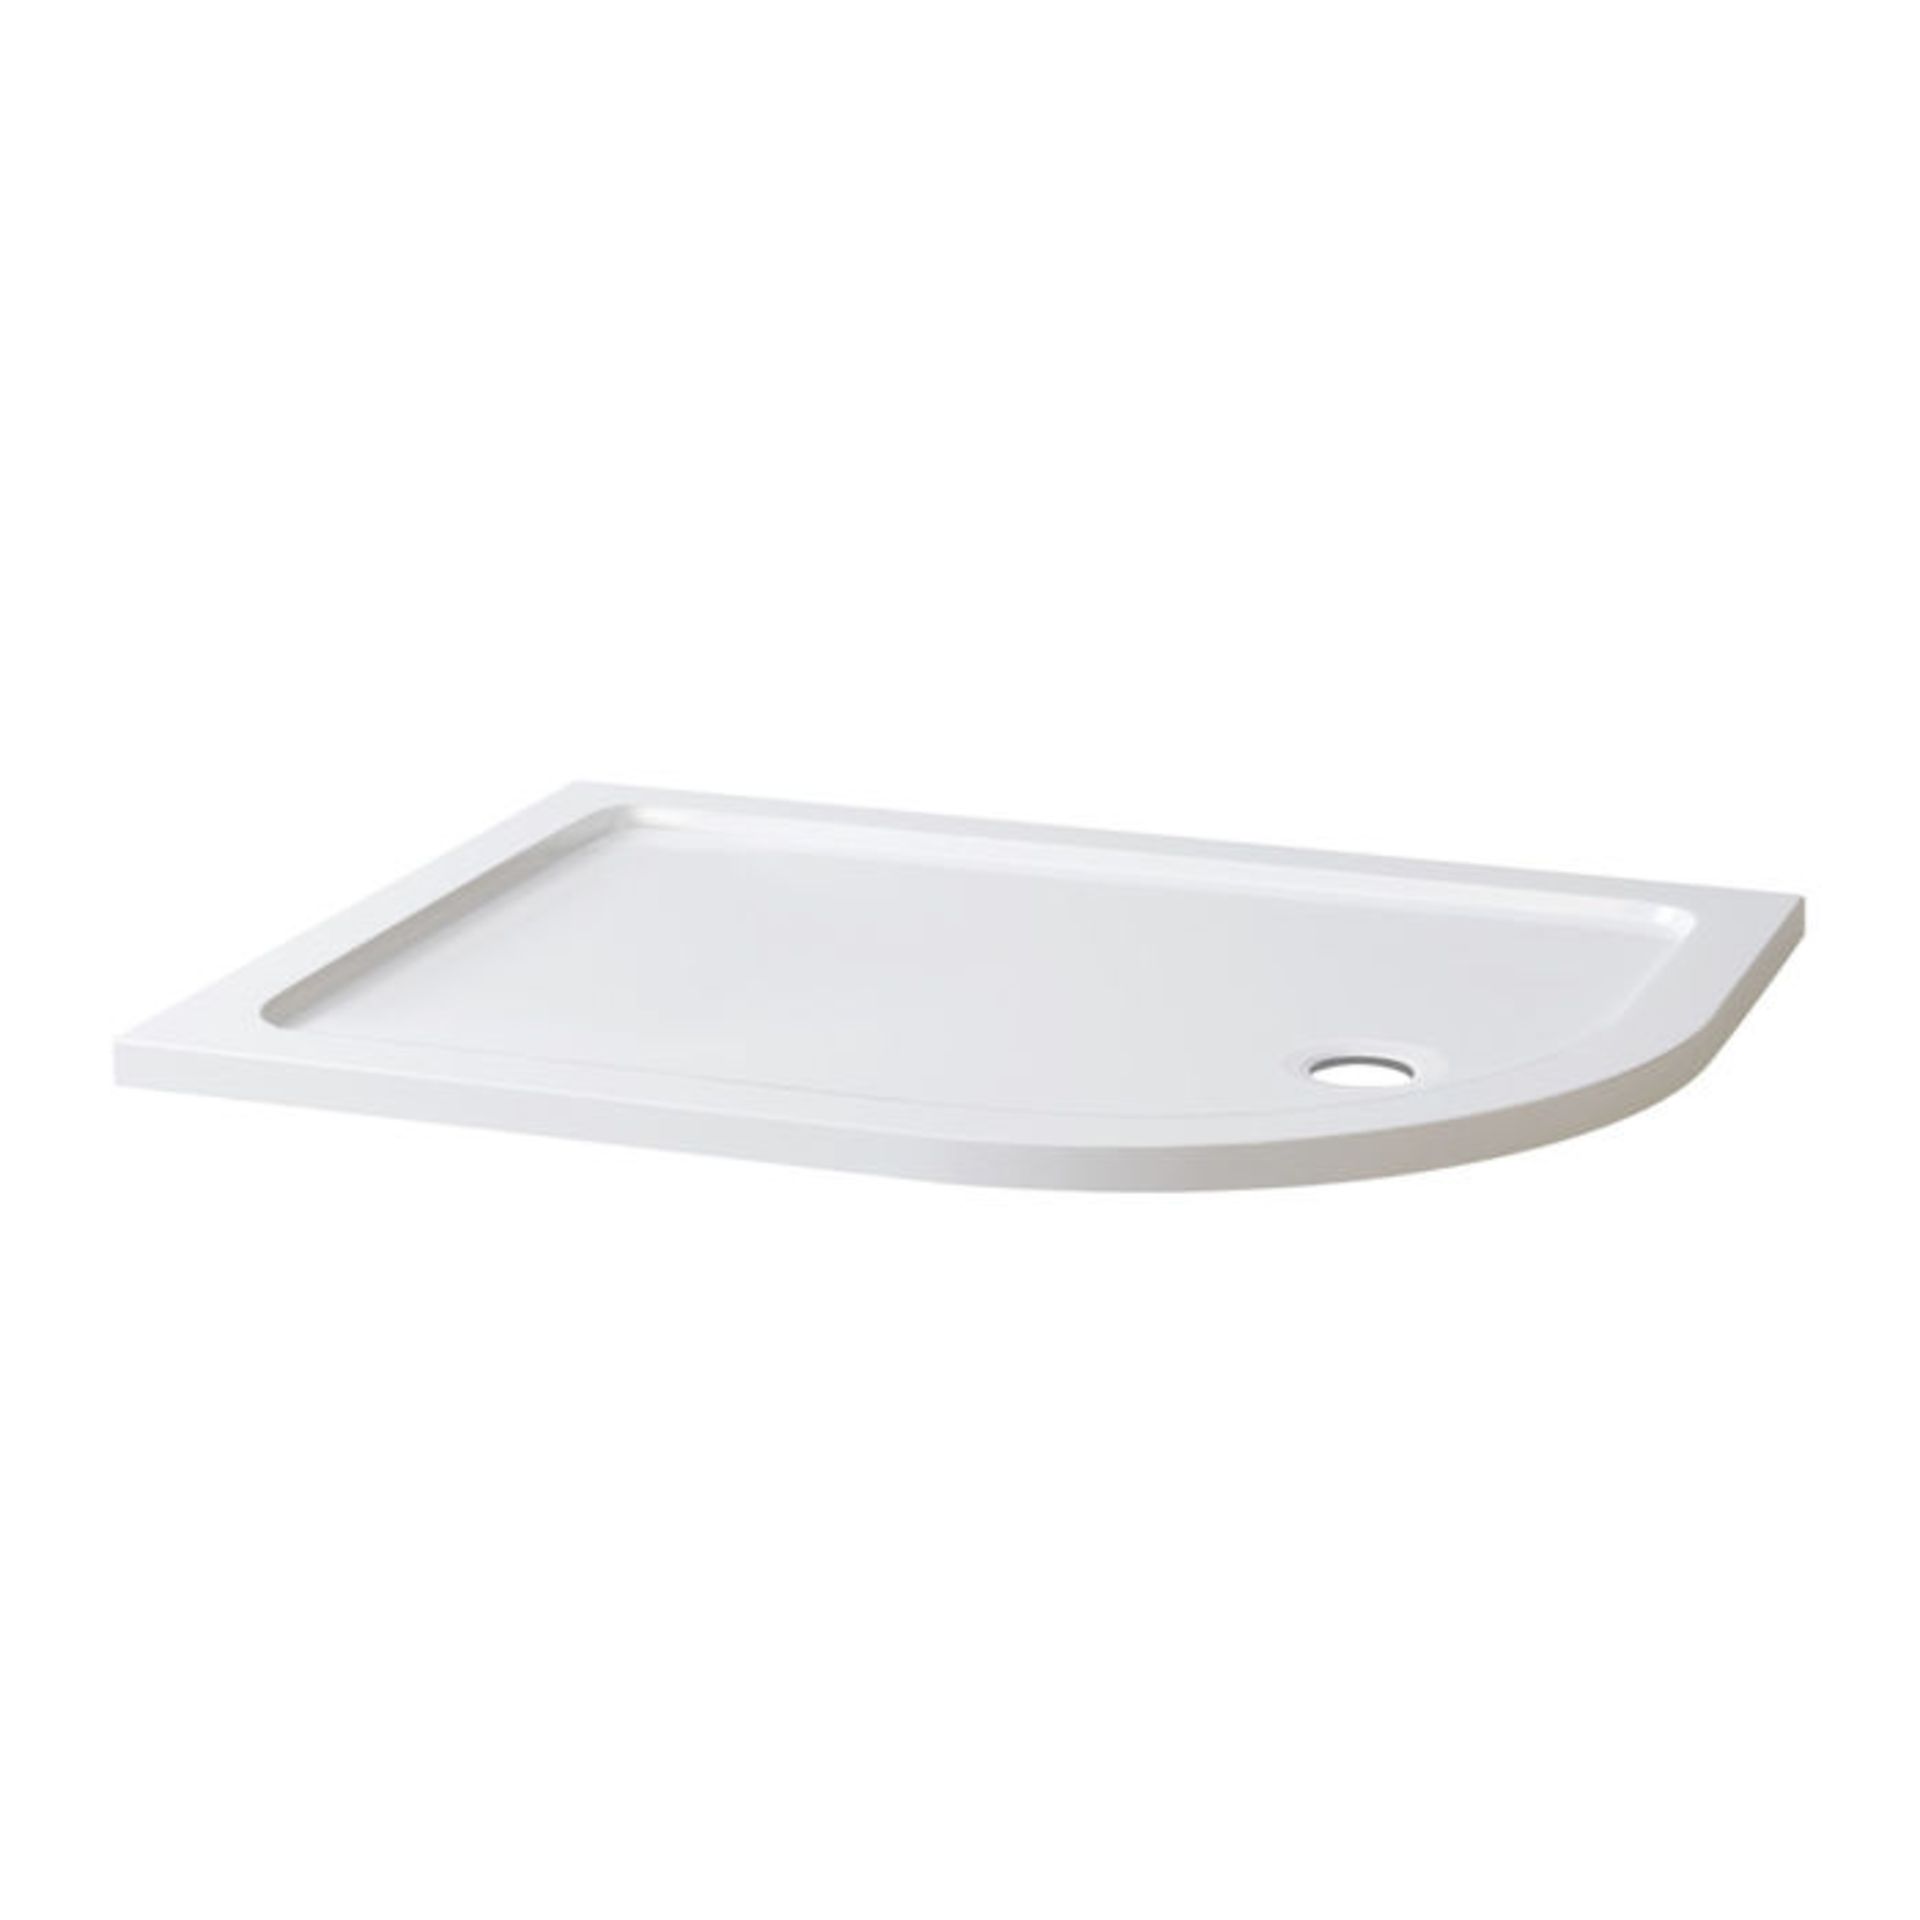 (AD91) 1200x900mm Offset Quadrant Ultra Slim Stone Shower Tray - Right. Low profile ultraDesign - Image 3 of 4